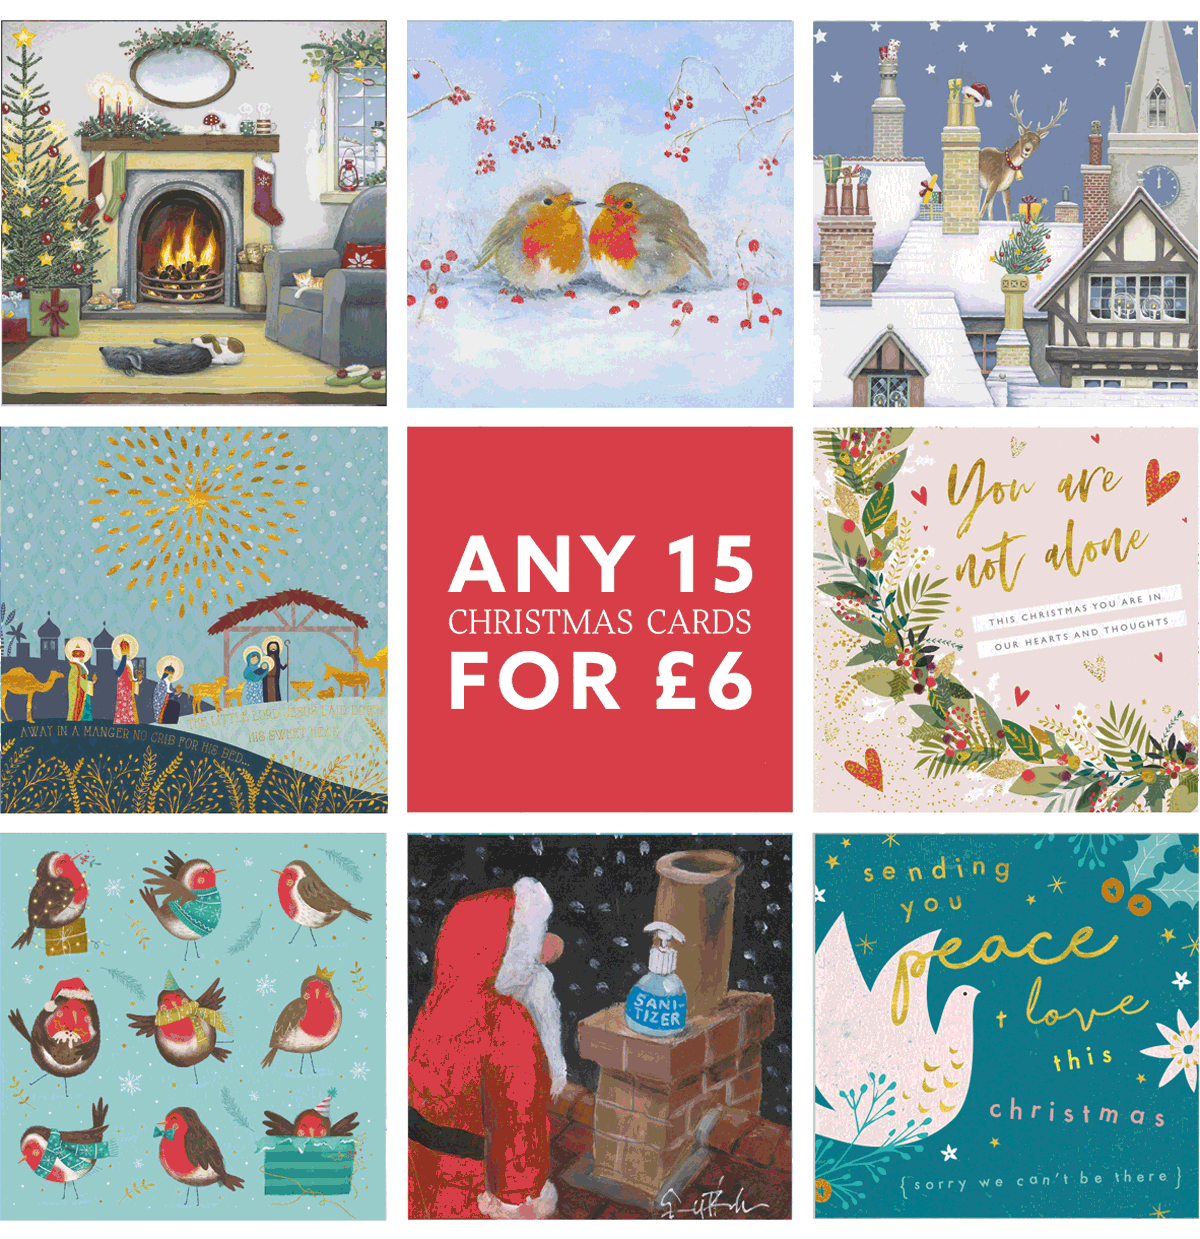 Whistlefish: Christmas is around the corner - 15 Xmas Cards for £6 ...